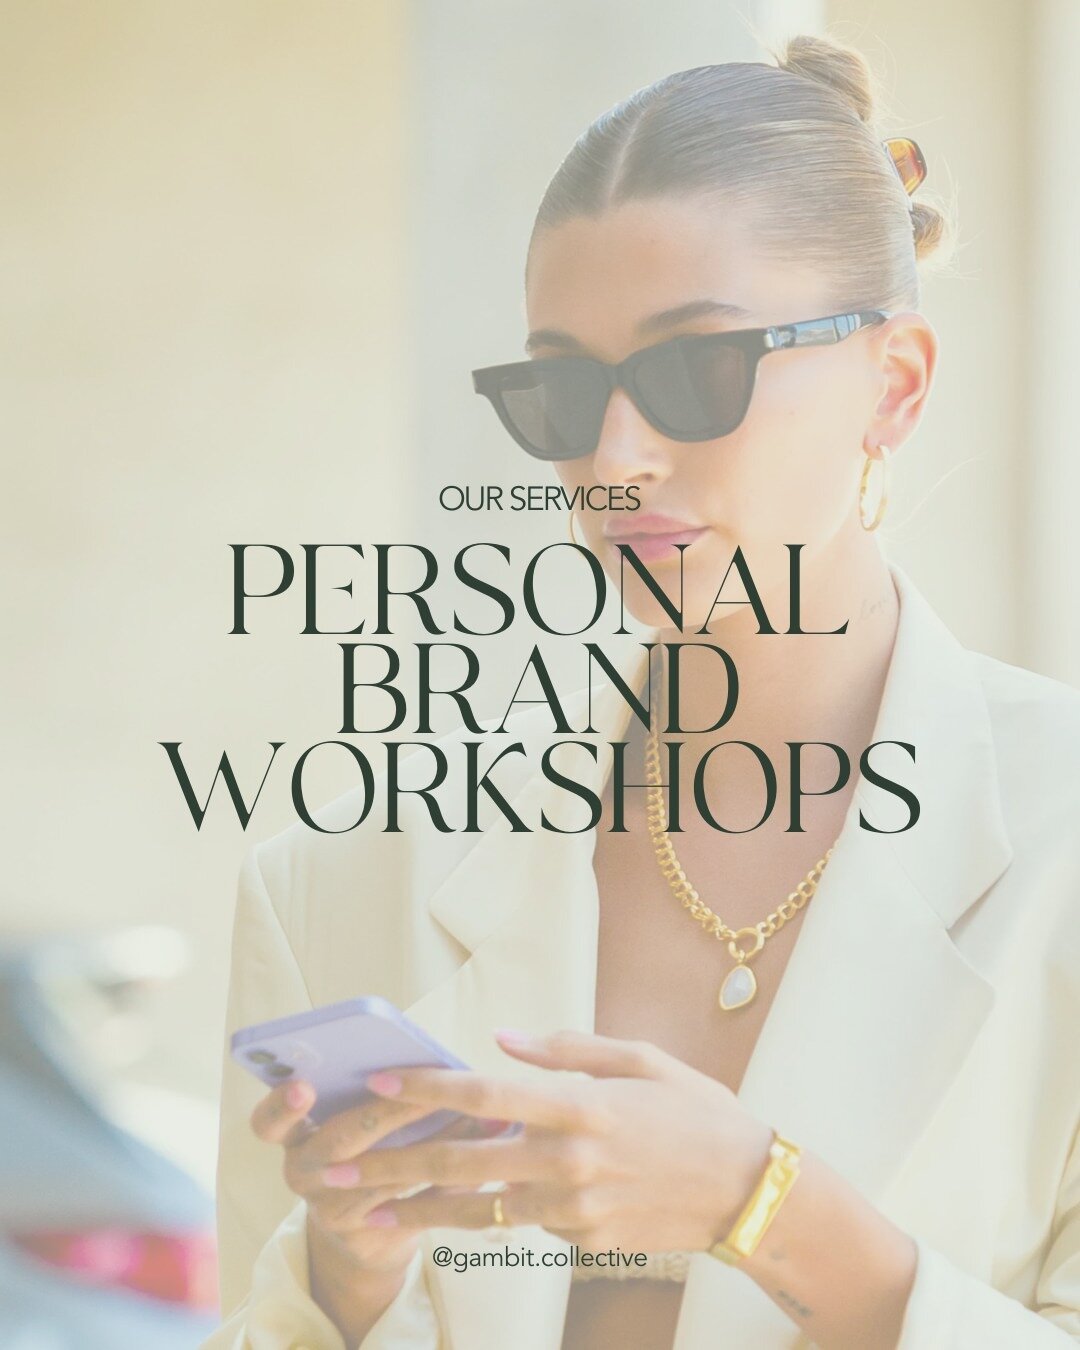 Investing in your personal brand is the key to success! 🌟⁠
⁠
Our personal branding workshops can help you:⁠
🙋🏻&zwj;♀️ Stand out from the crowd⁠
🤝 Build your professional network⁠
📈 Generate leads and new business⁠
✨ Showcase your unique skills a